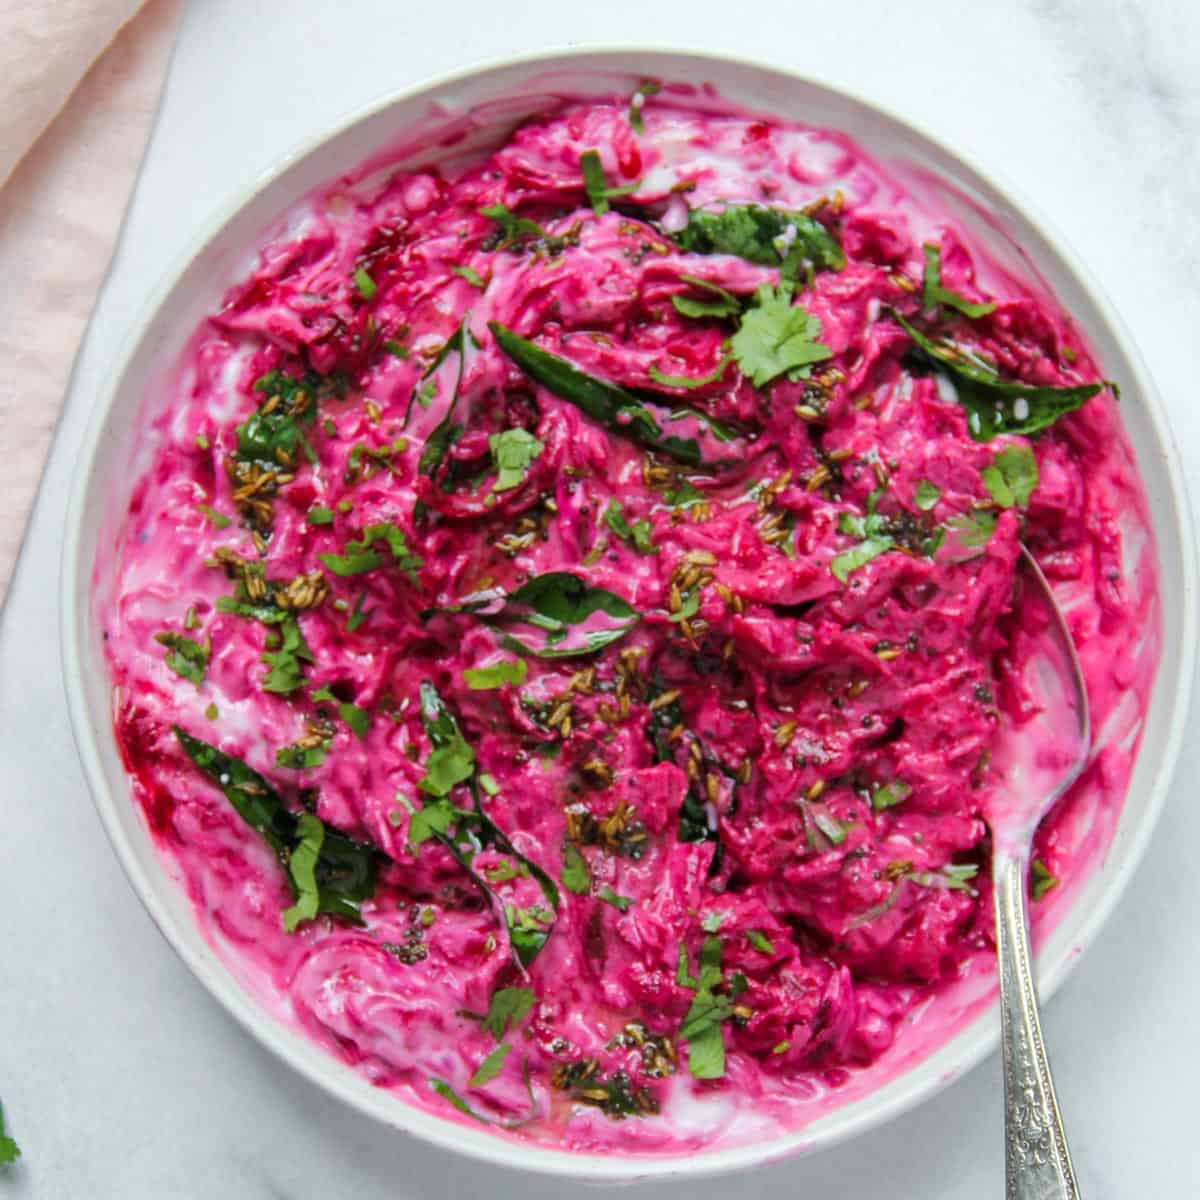 beet koshimbir in a white bowl garnished with cilantro and curry leaves